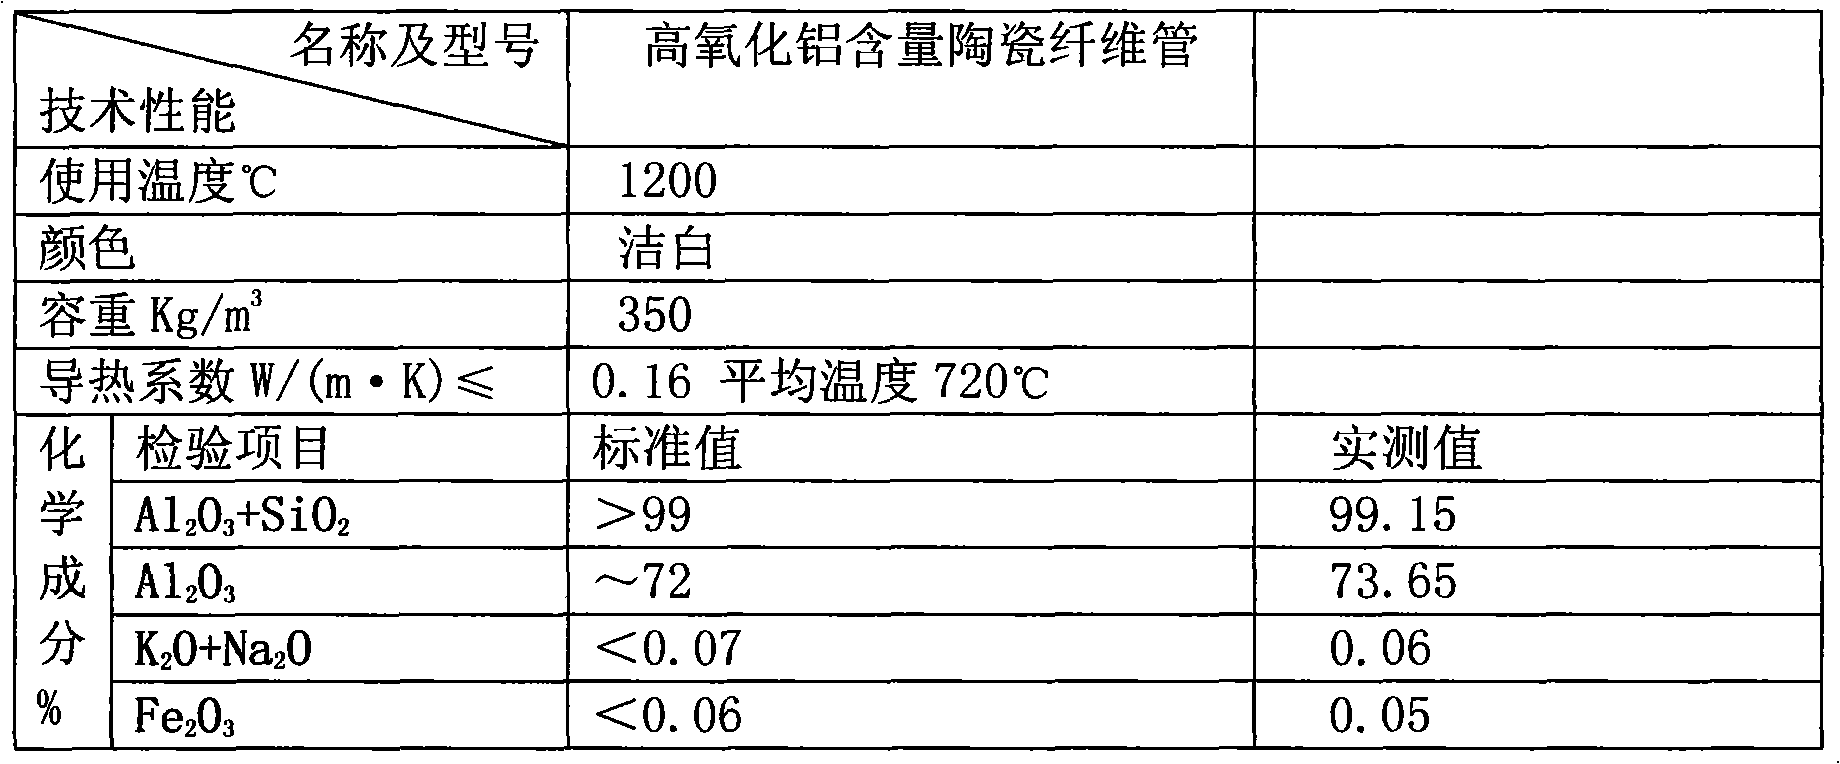 Optical-fiber temperature measuring probe and optical cable cooling method in high-temperature environment